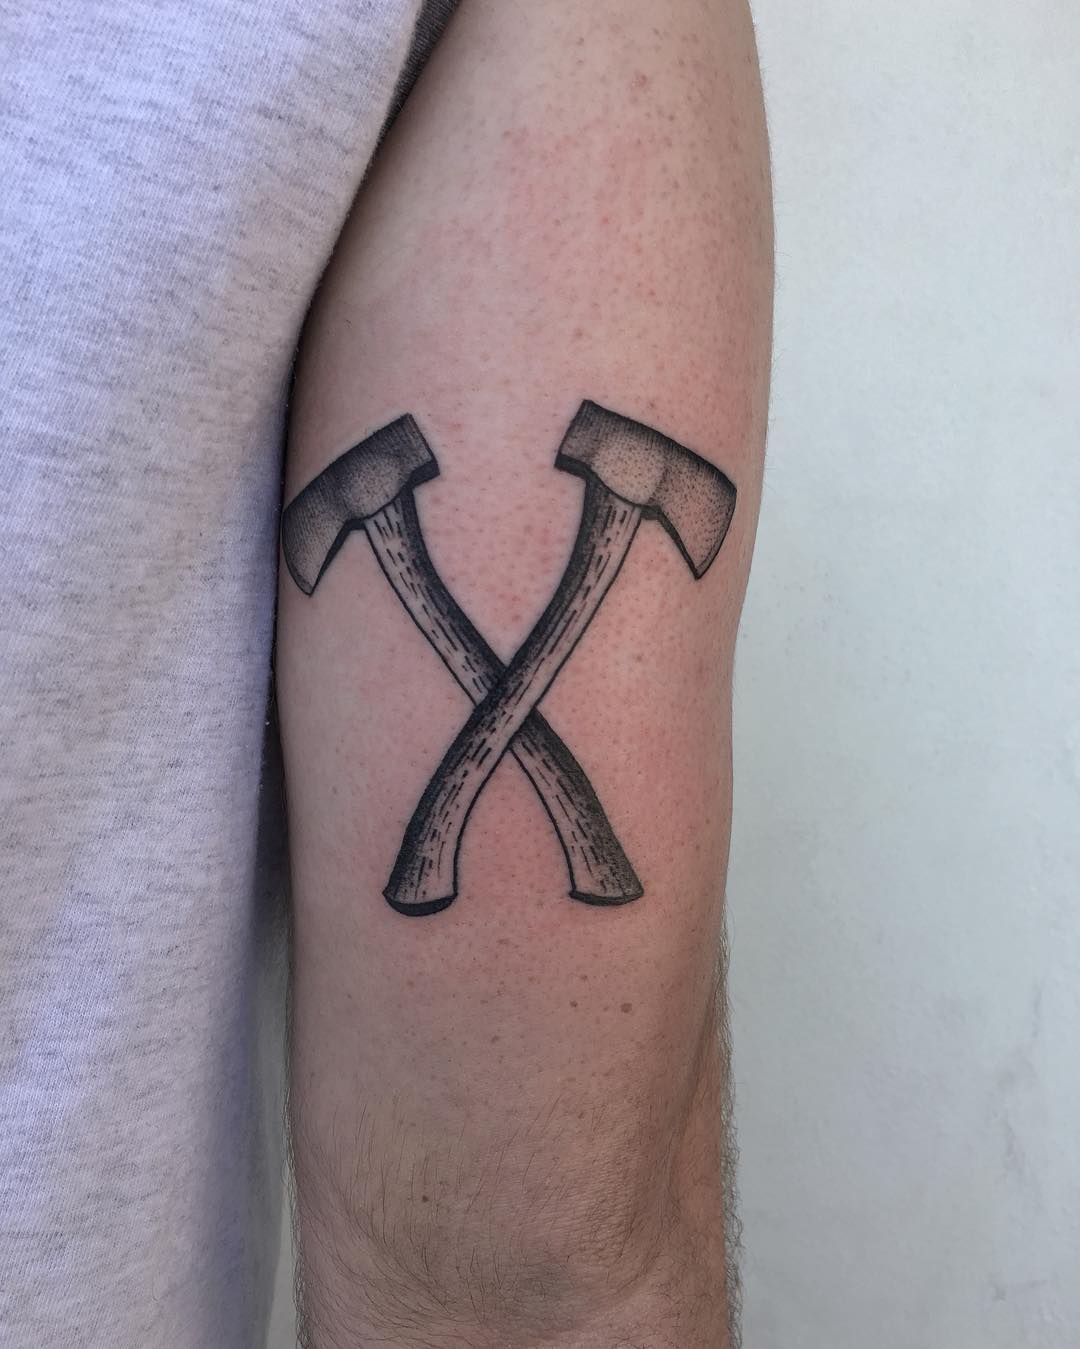 Two axes by @justinoliviertattoo